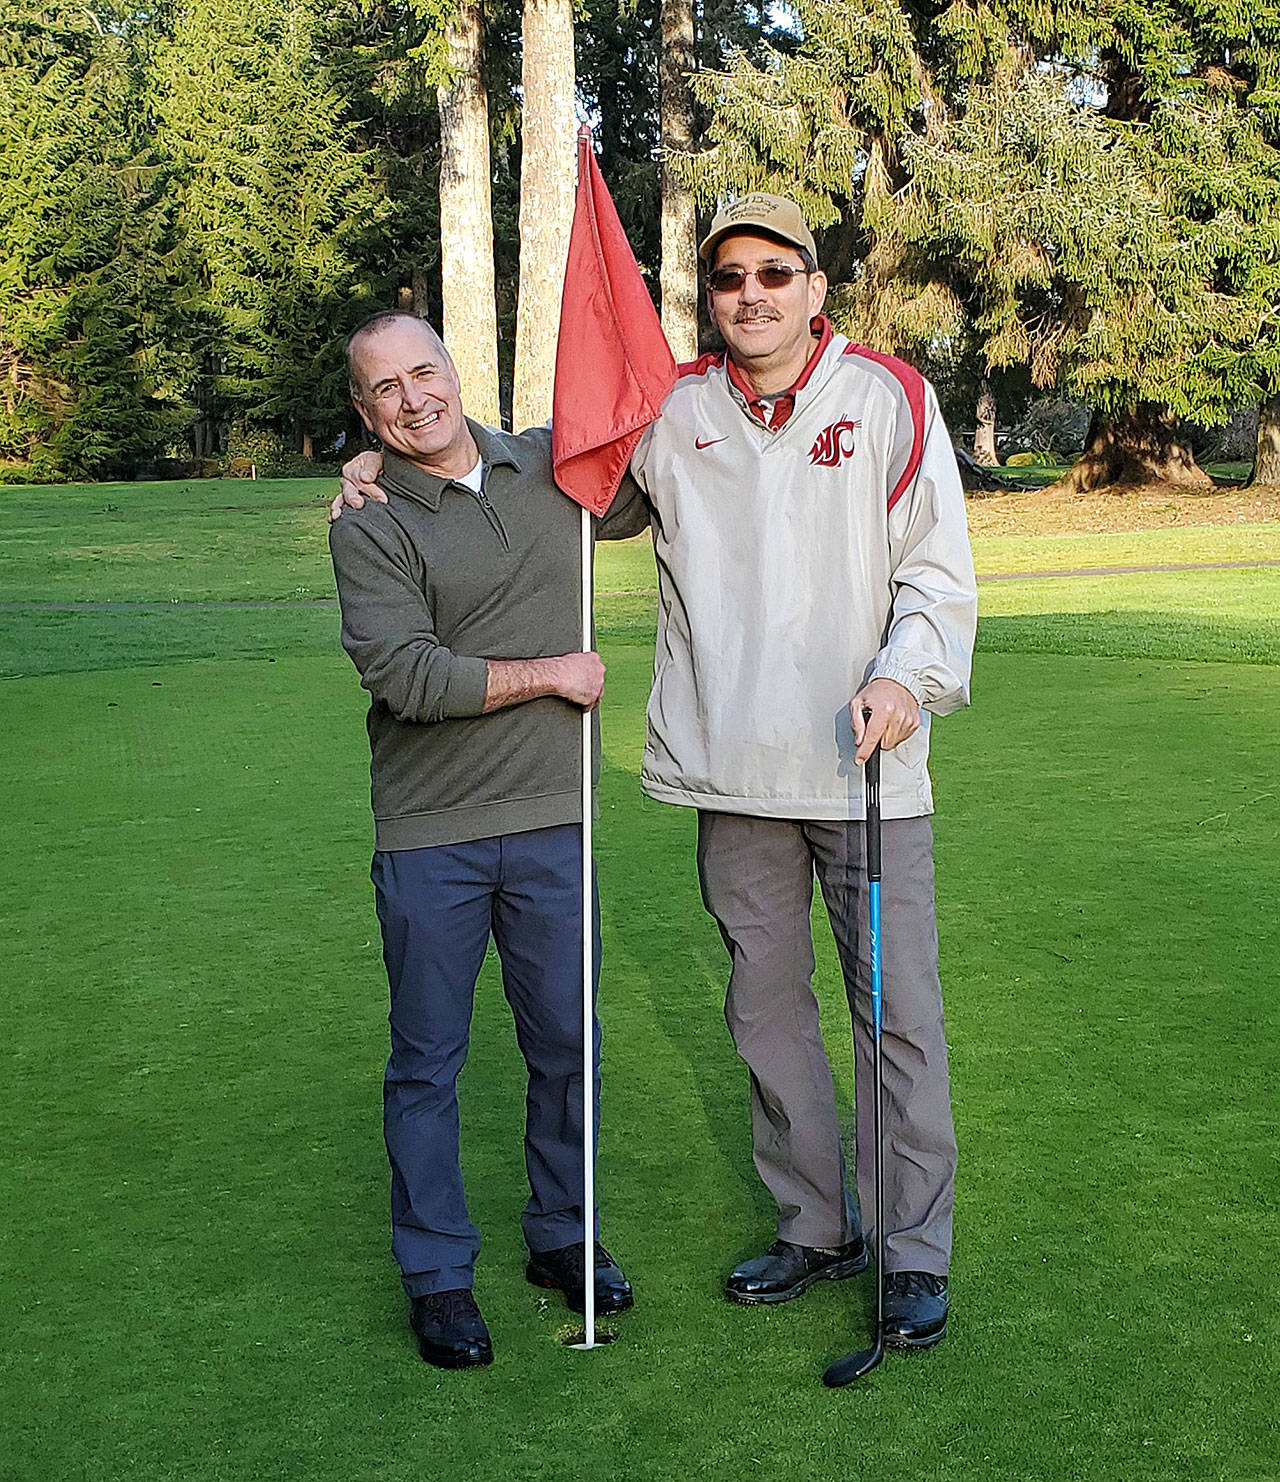 Ed Patrick, right, stands with Lee Gochnour after Patrick recorded an ace on the No. 4 hole at Grays Harbor Country Club on Sunday, Feb. 9. (Submitted photo)